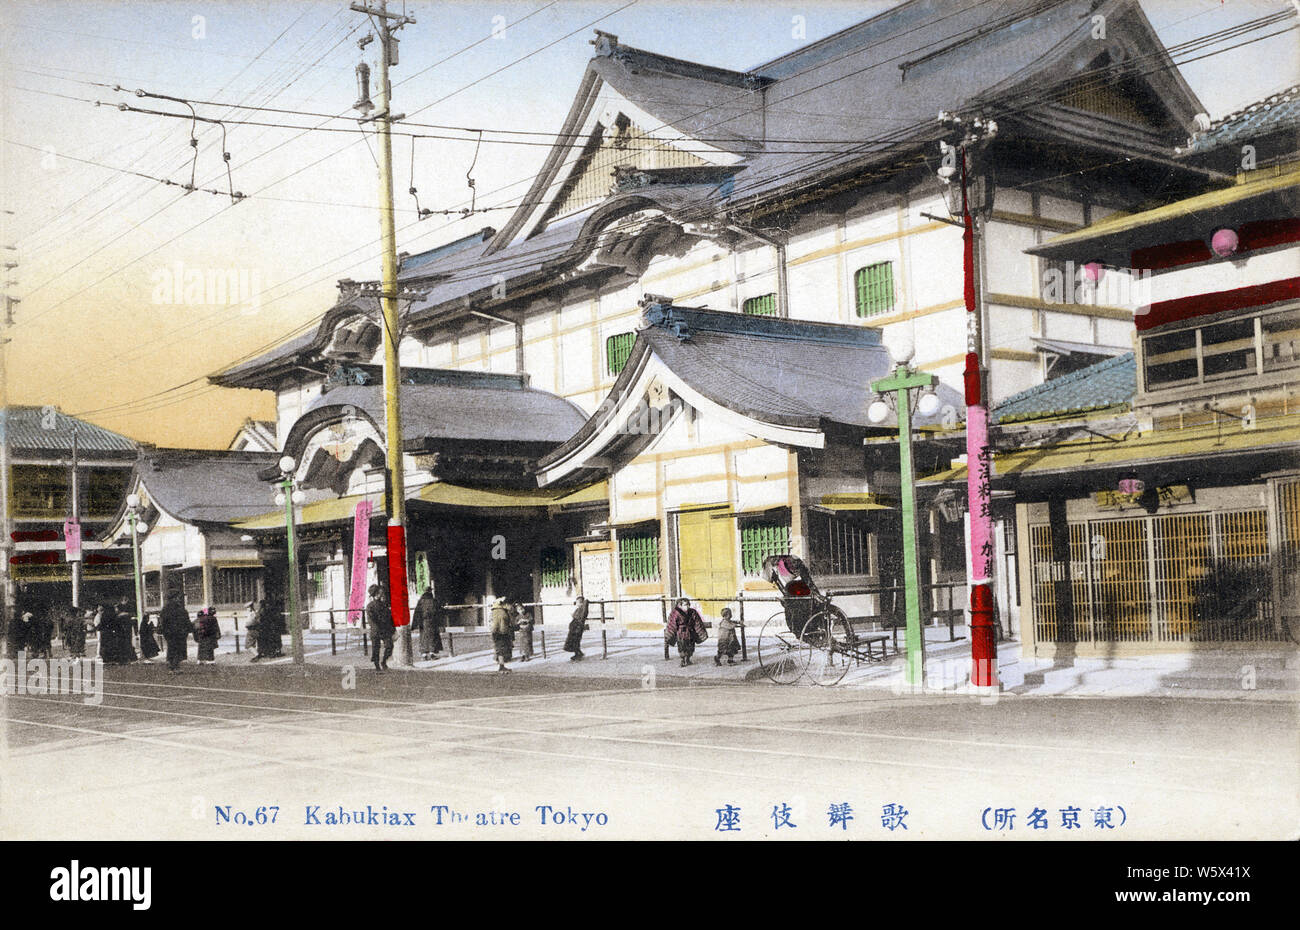 [ 1900s Japan - Tokyo Kabukiza Theater on Ginza ] —   Kabukiza, a theater for kabuki performances, in Ginza, Tokyo. The original Kabukiza was established in 1889 (Meiji 22). It was replaced with the building on this image in 1911 (Meiji 44). This structure was destroyed by fire in 1921 (Taisho 10), after which a new building was built in baroque Japanese revivalist style.  20th century vintage postcard. Stock Photo